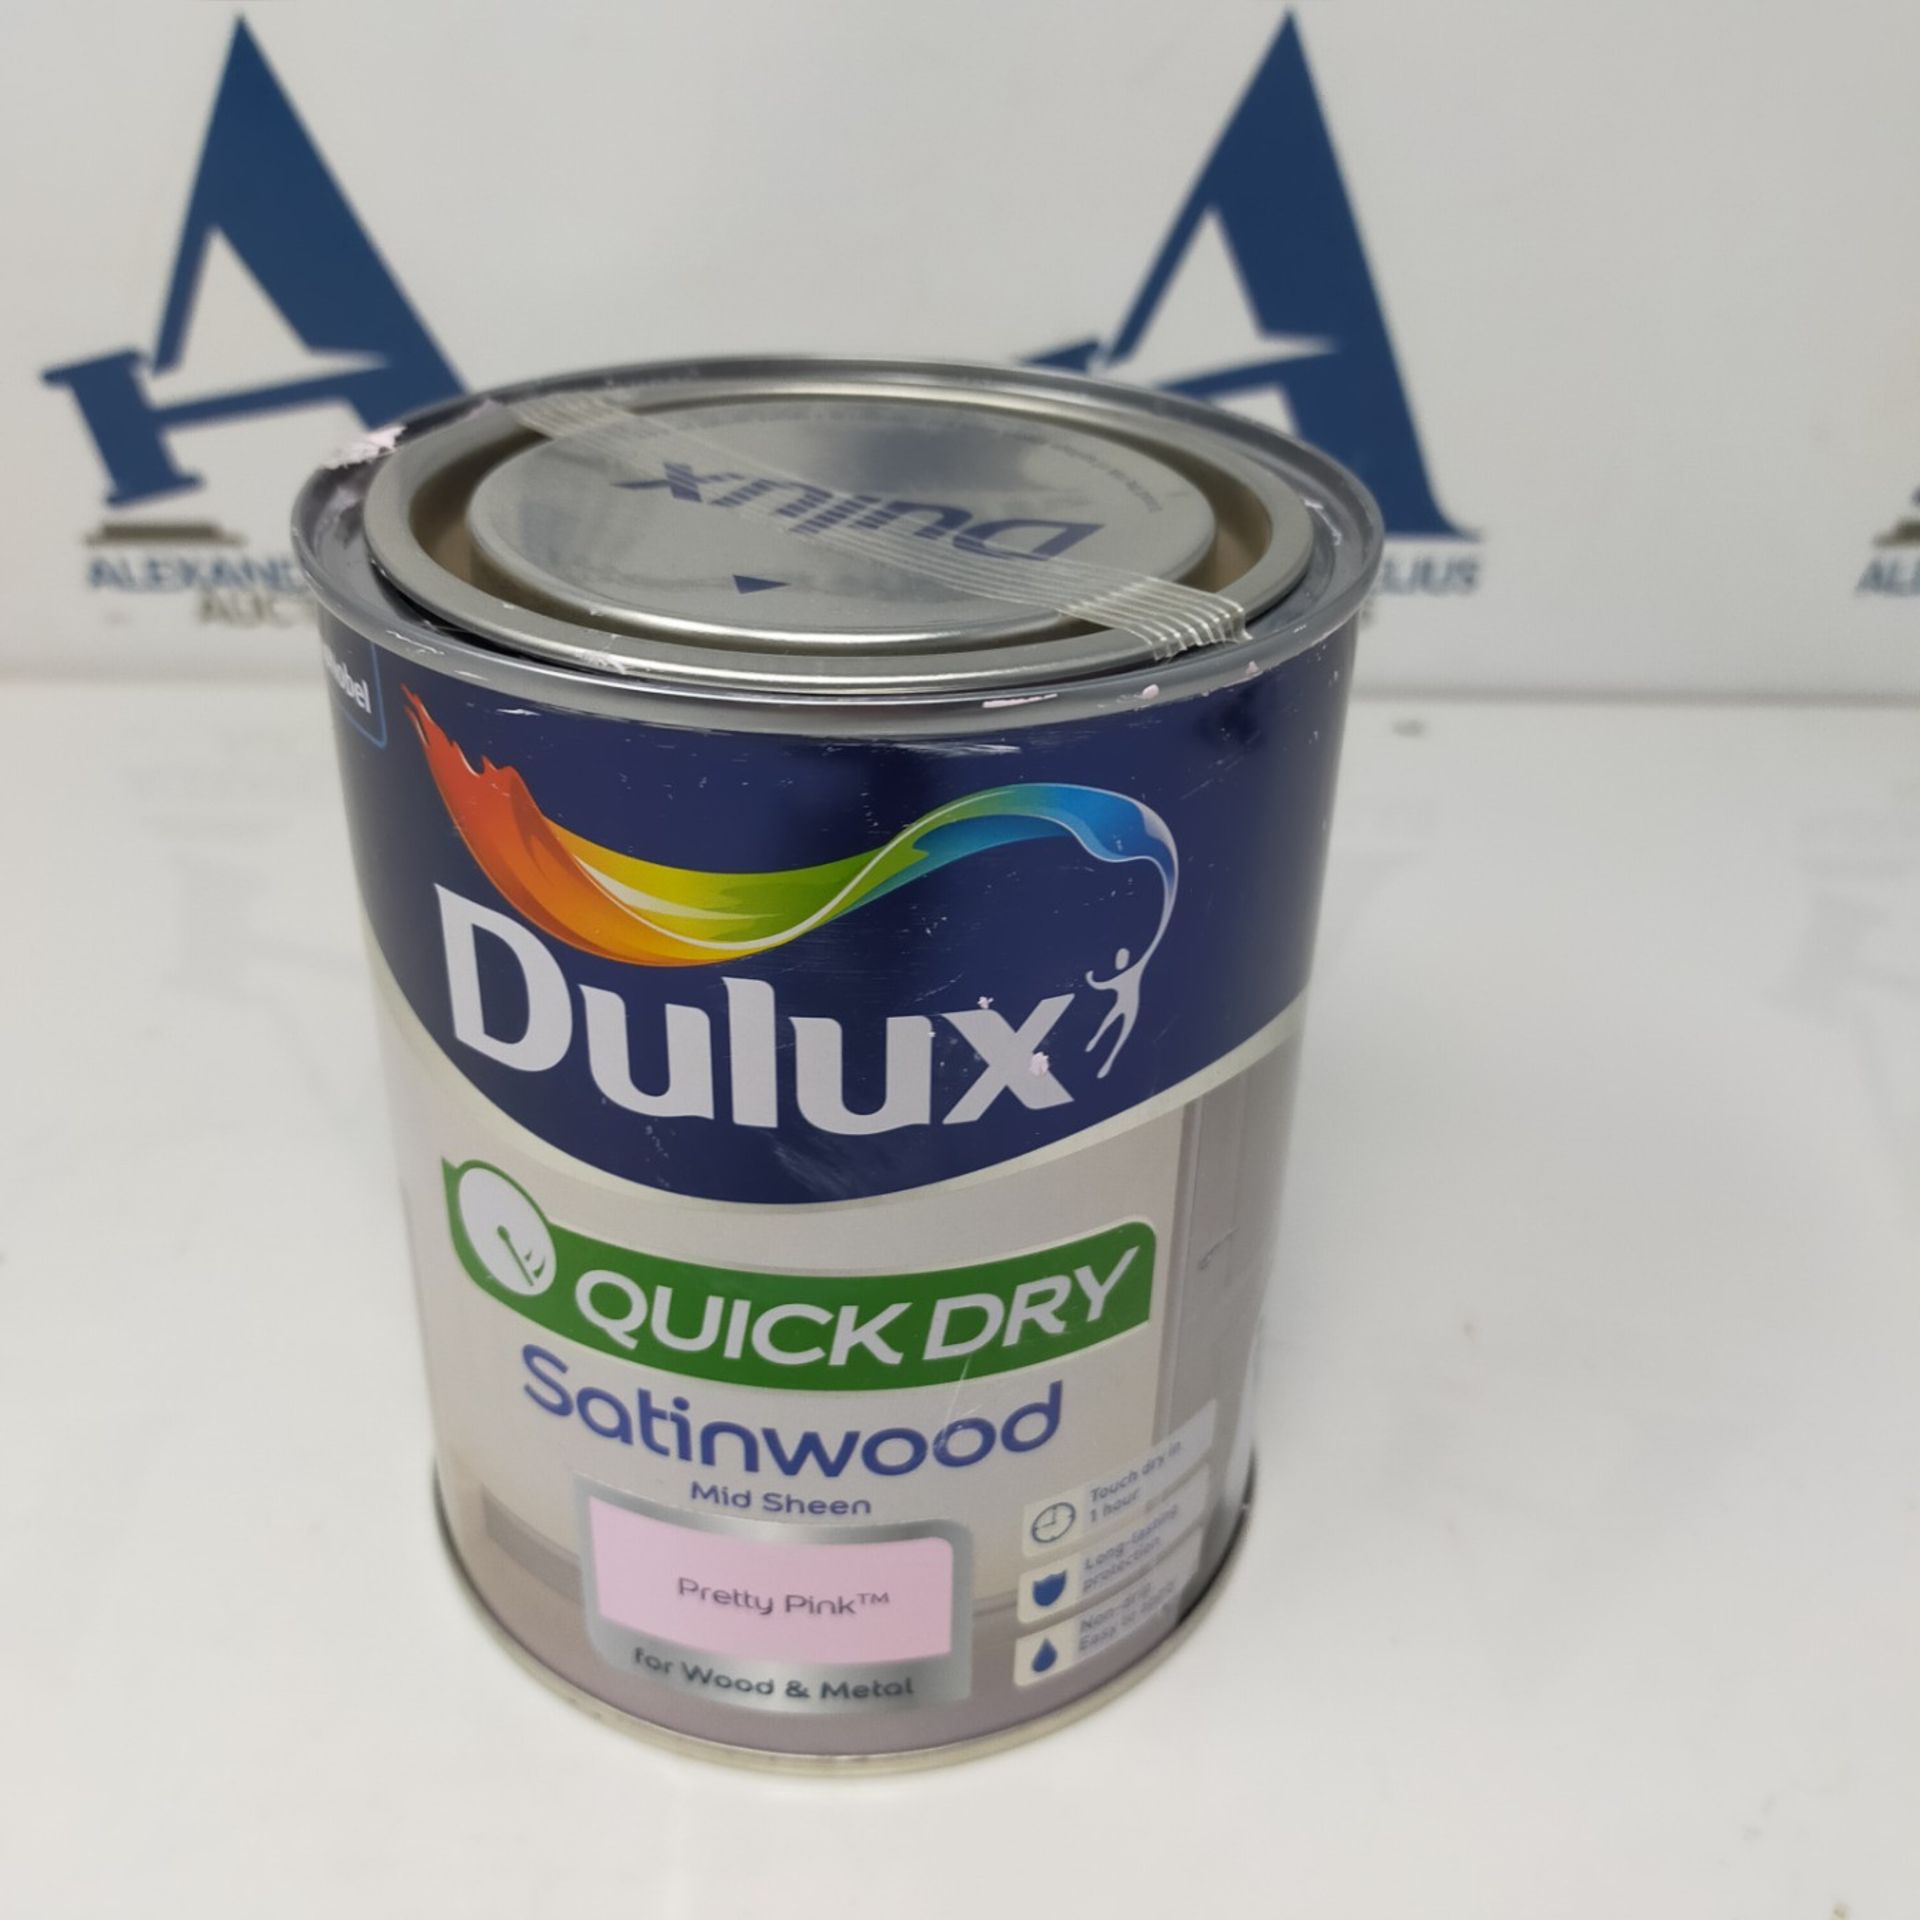 Dulux Quick Dry Satinwood Paint - Pretty Pink - 750ML,5358155